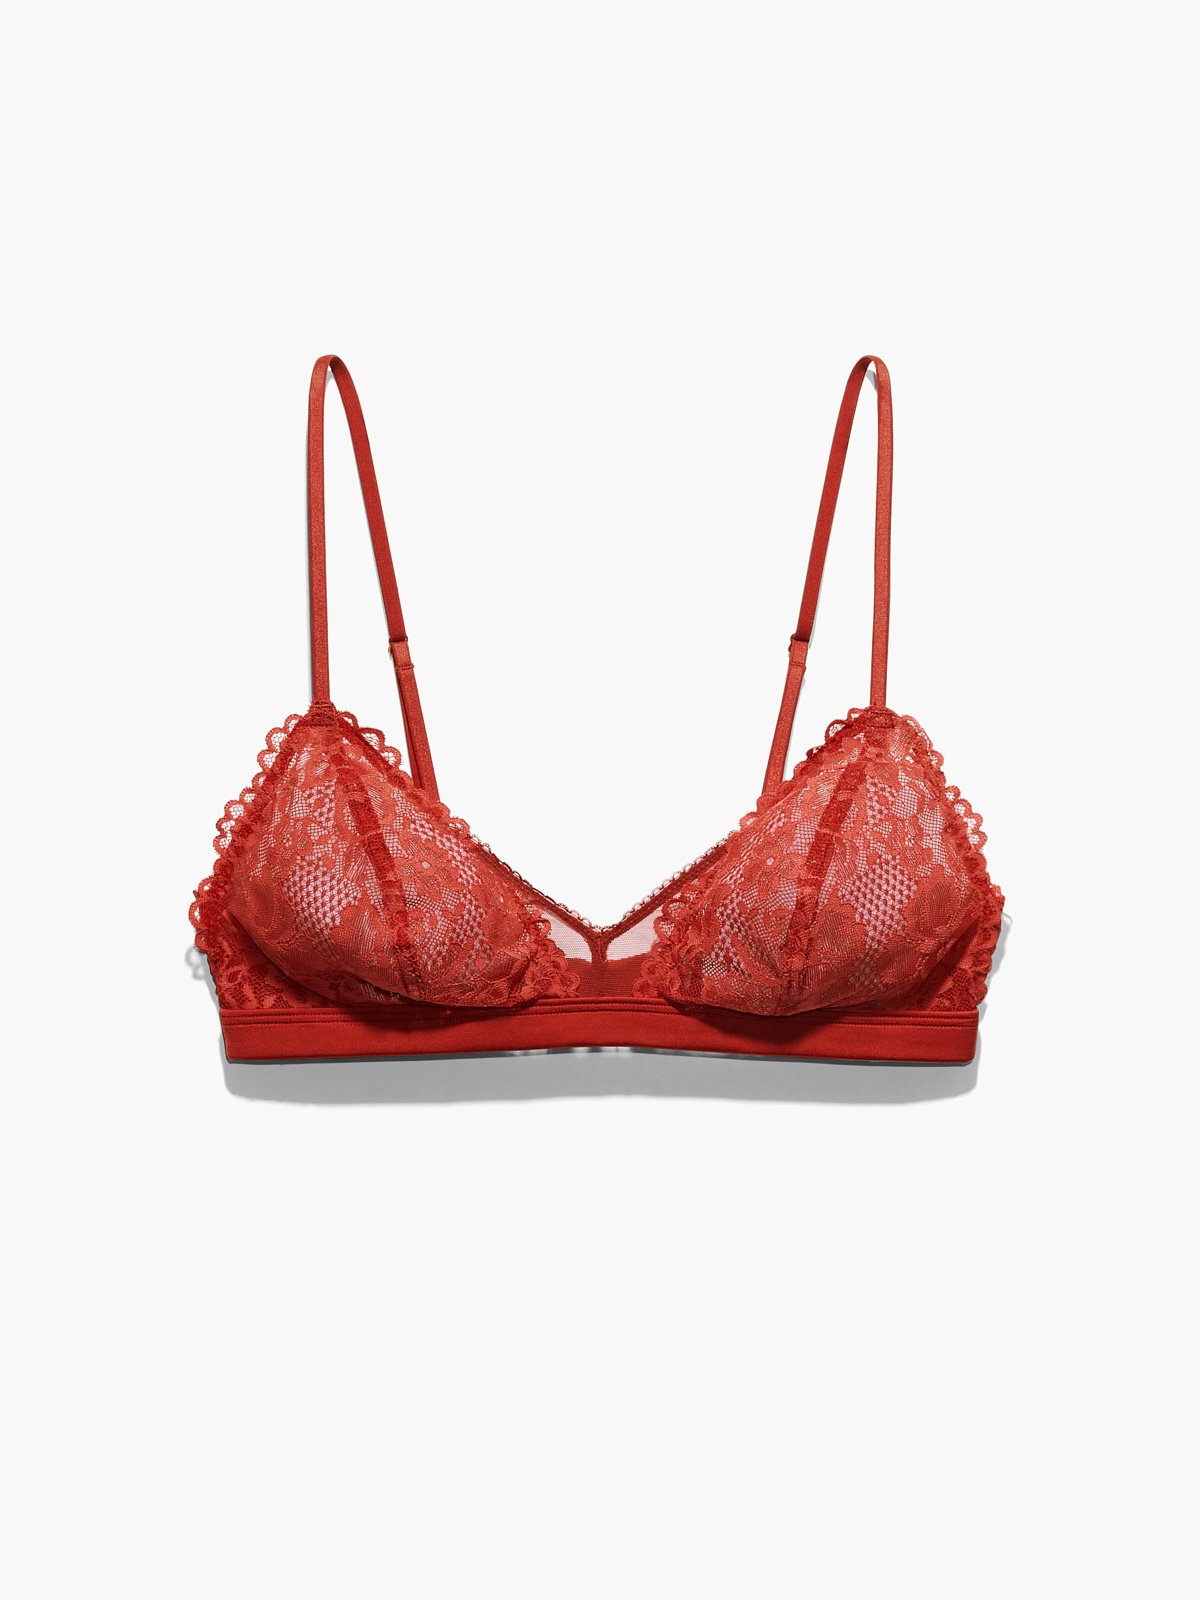 Floral Lace & Mesh Bralette in Red | SAVAGE X FENTY